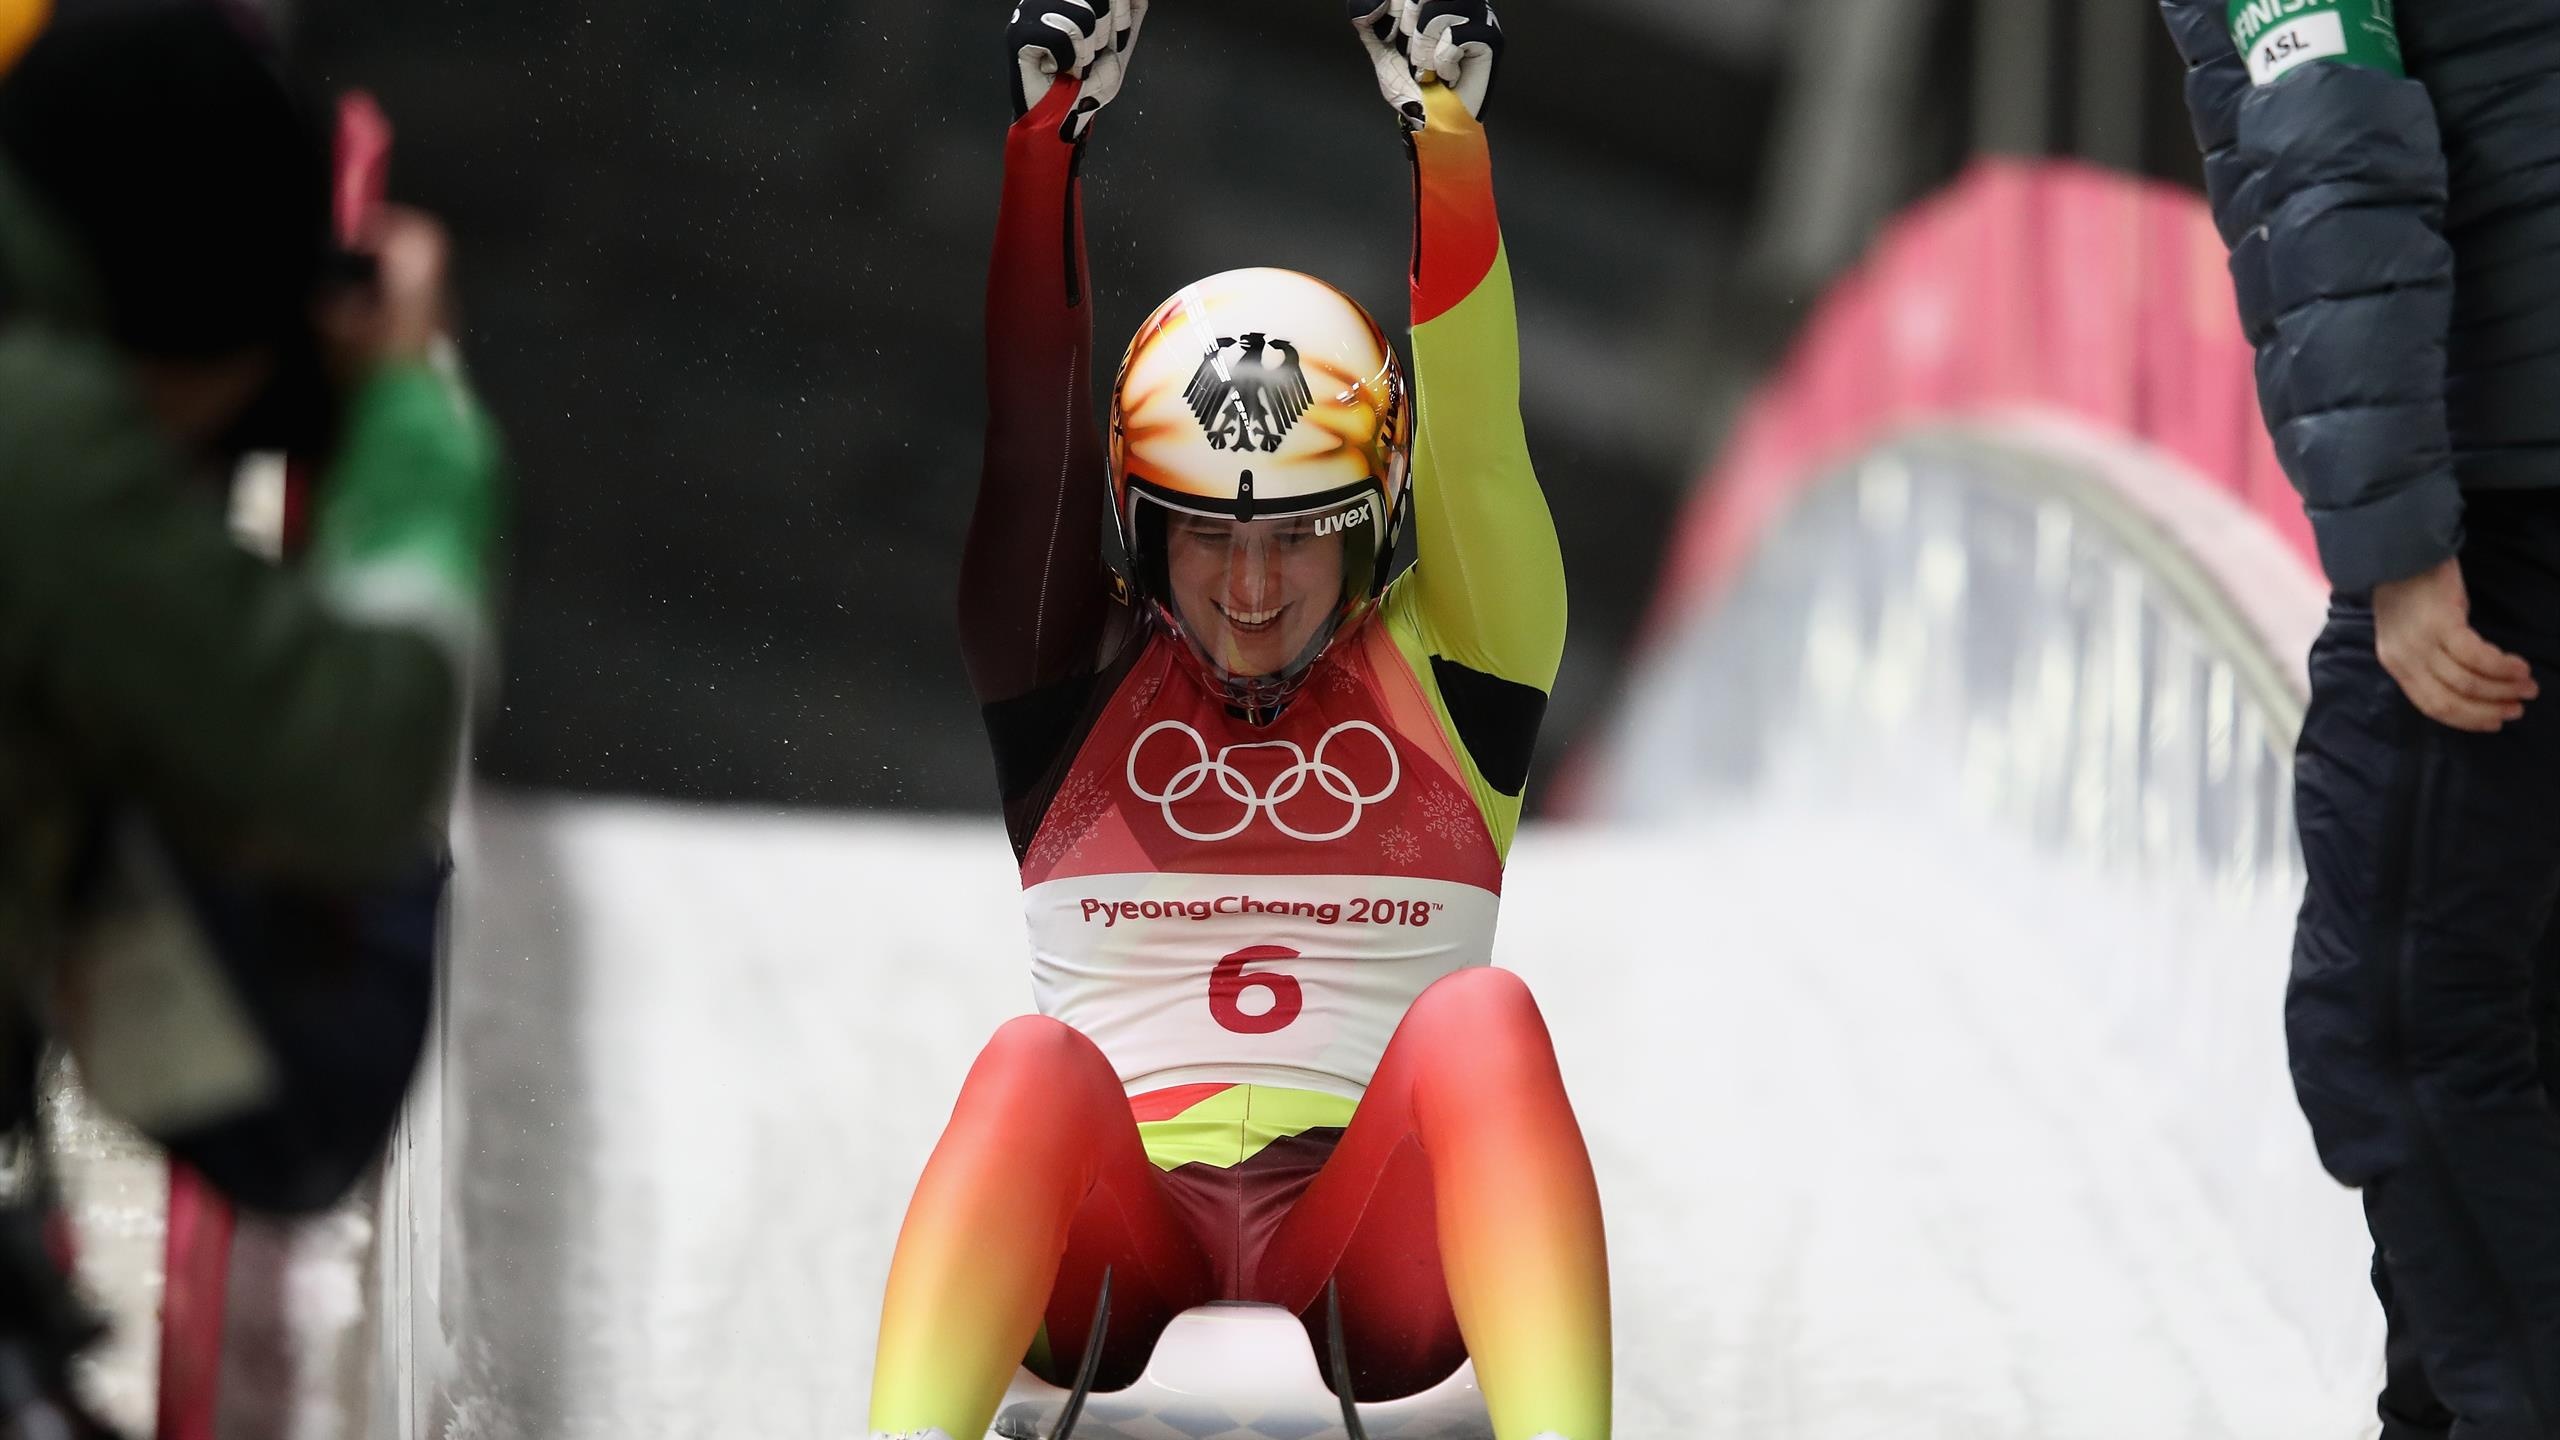 Luge: A German luger celebrates after finishing at the 2018 PyeongChang Winter Olympics. 2560x1440 HD Background.